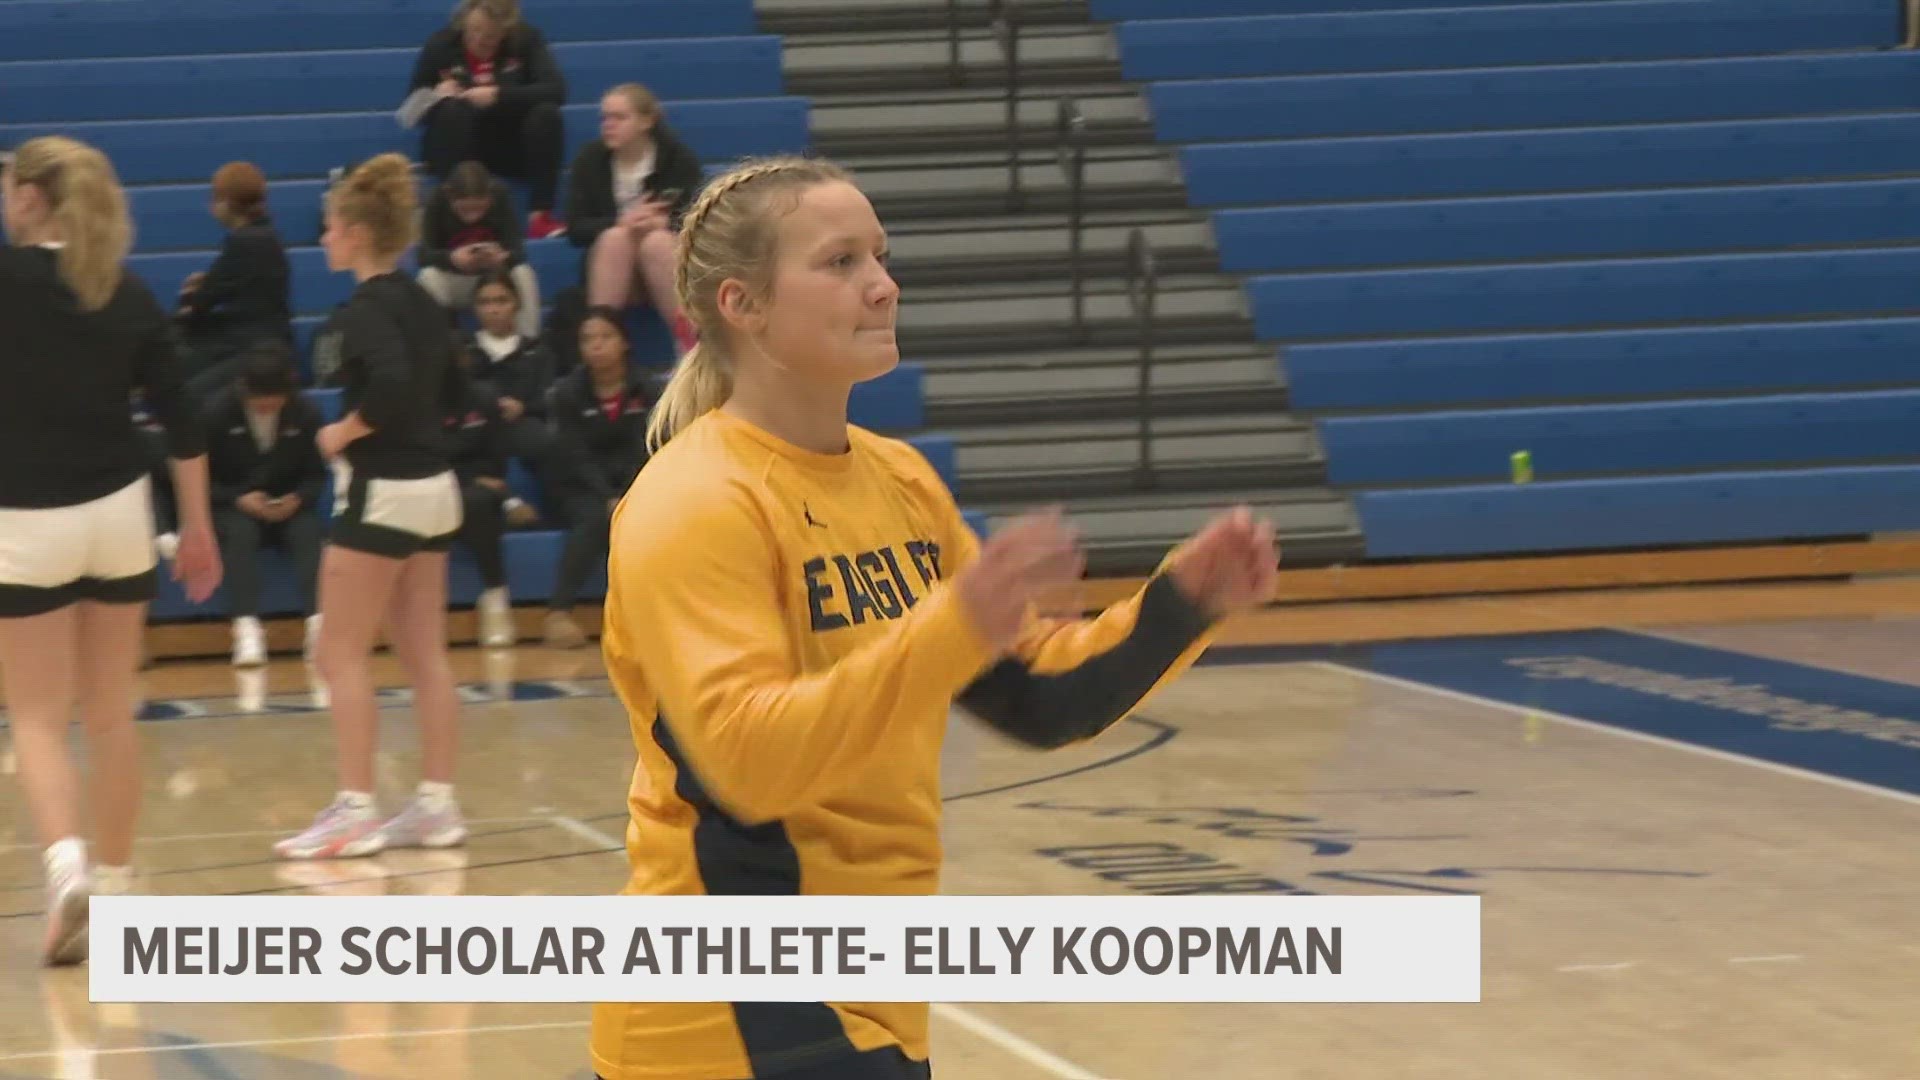 Koopman says it all comes down to being productive with her time.